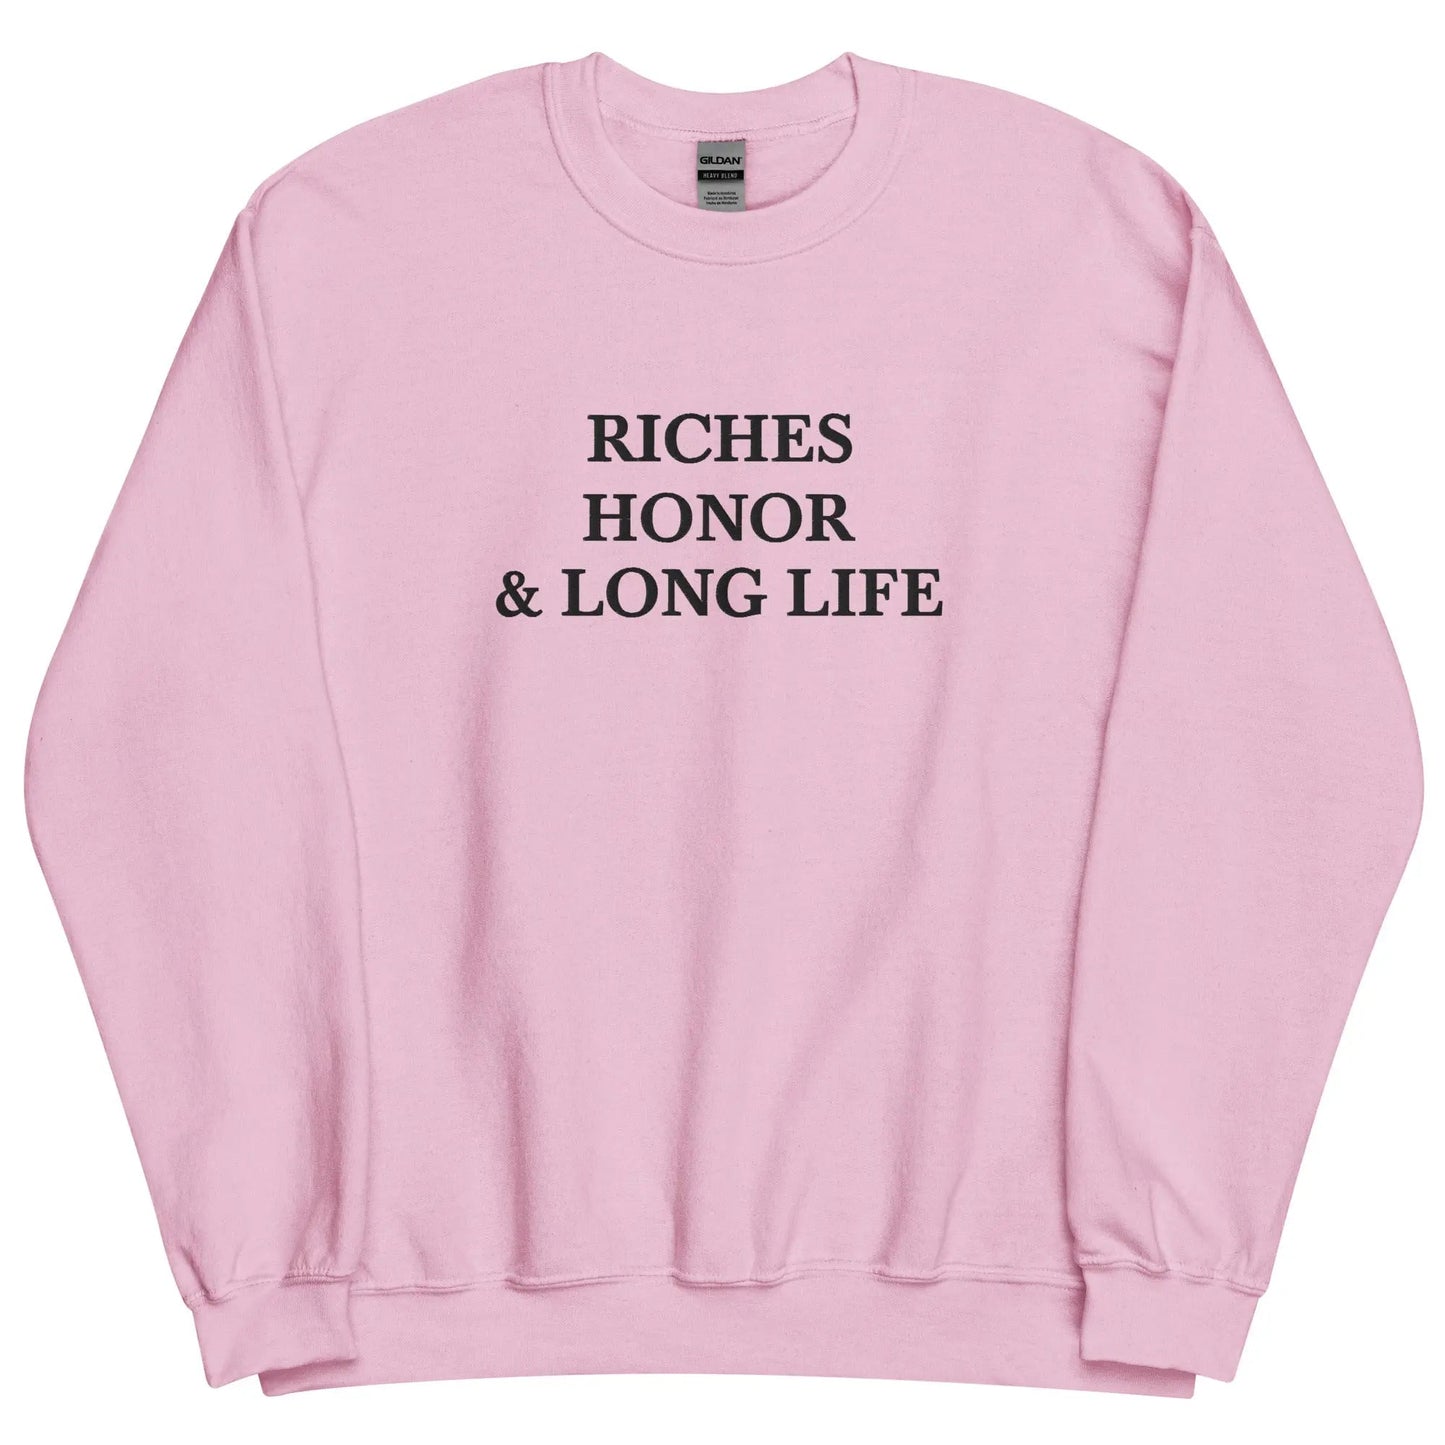 Embroidered Riches Honor & Long Life Crewneck Sweatshirt-clothes- sweater-Light Pink-S-mysticalcherry